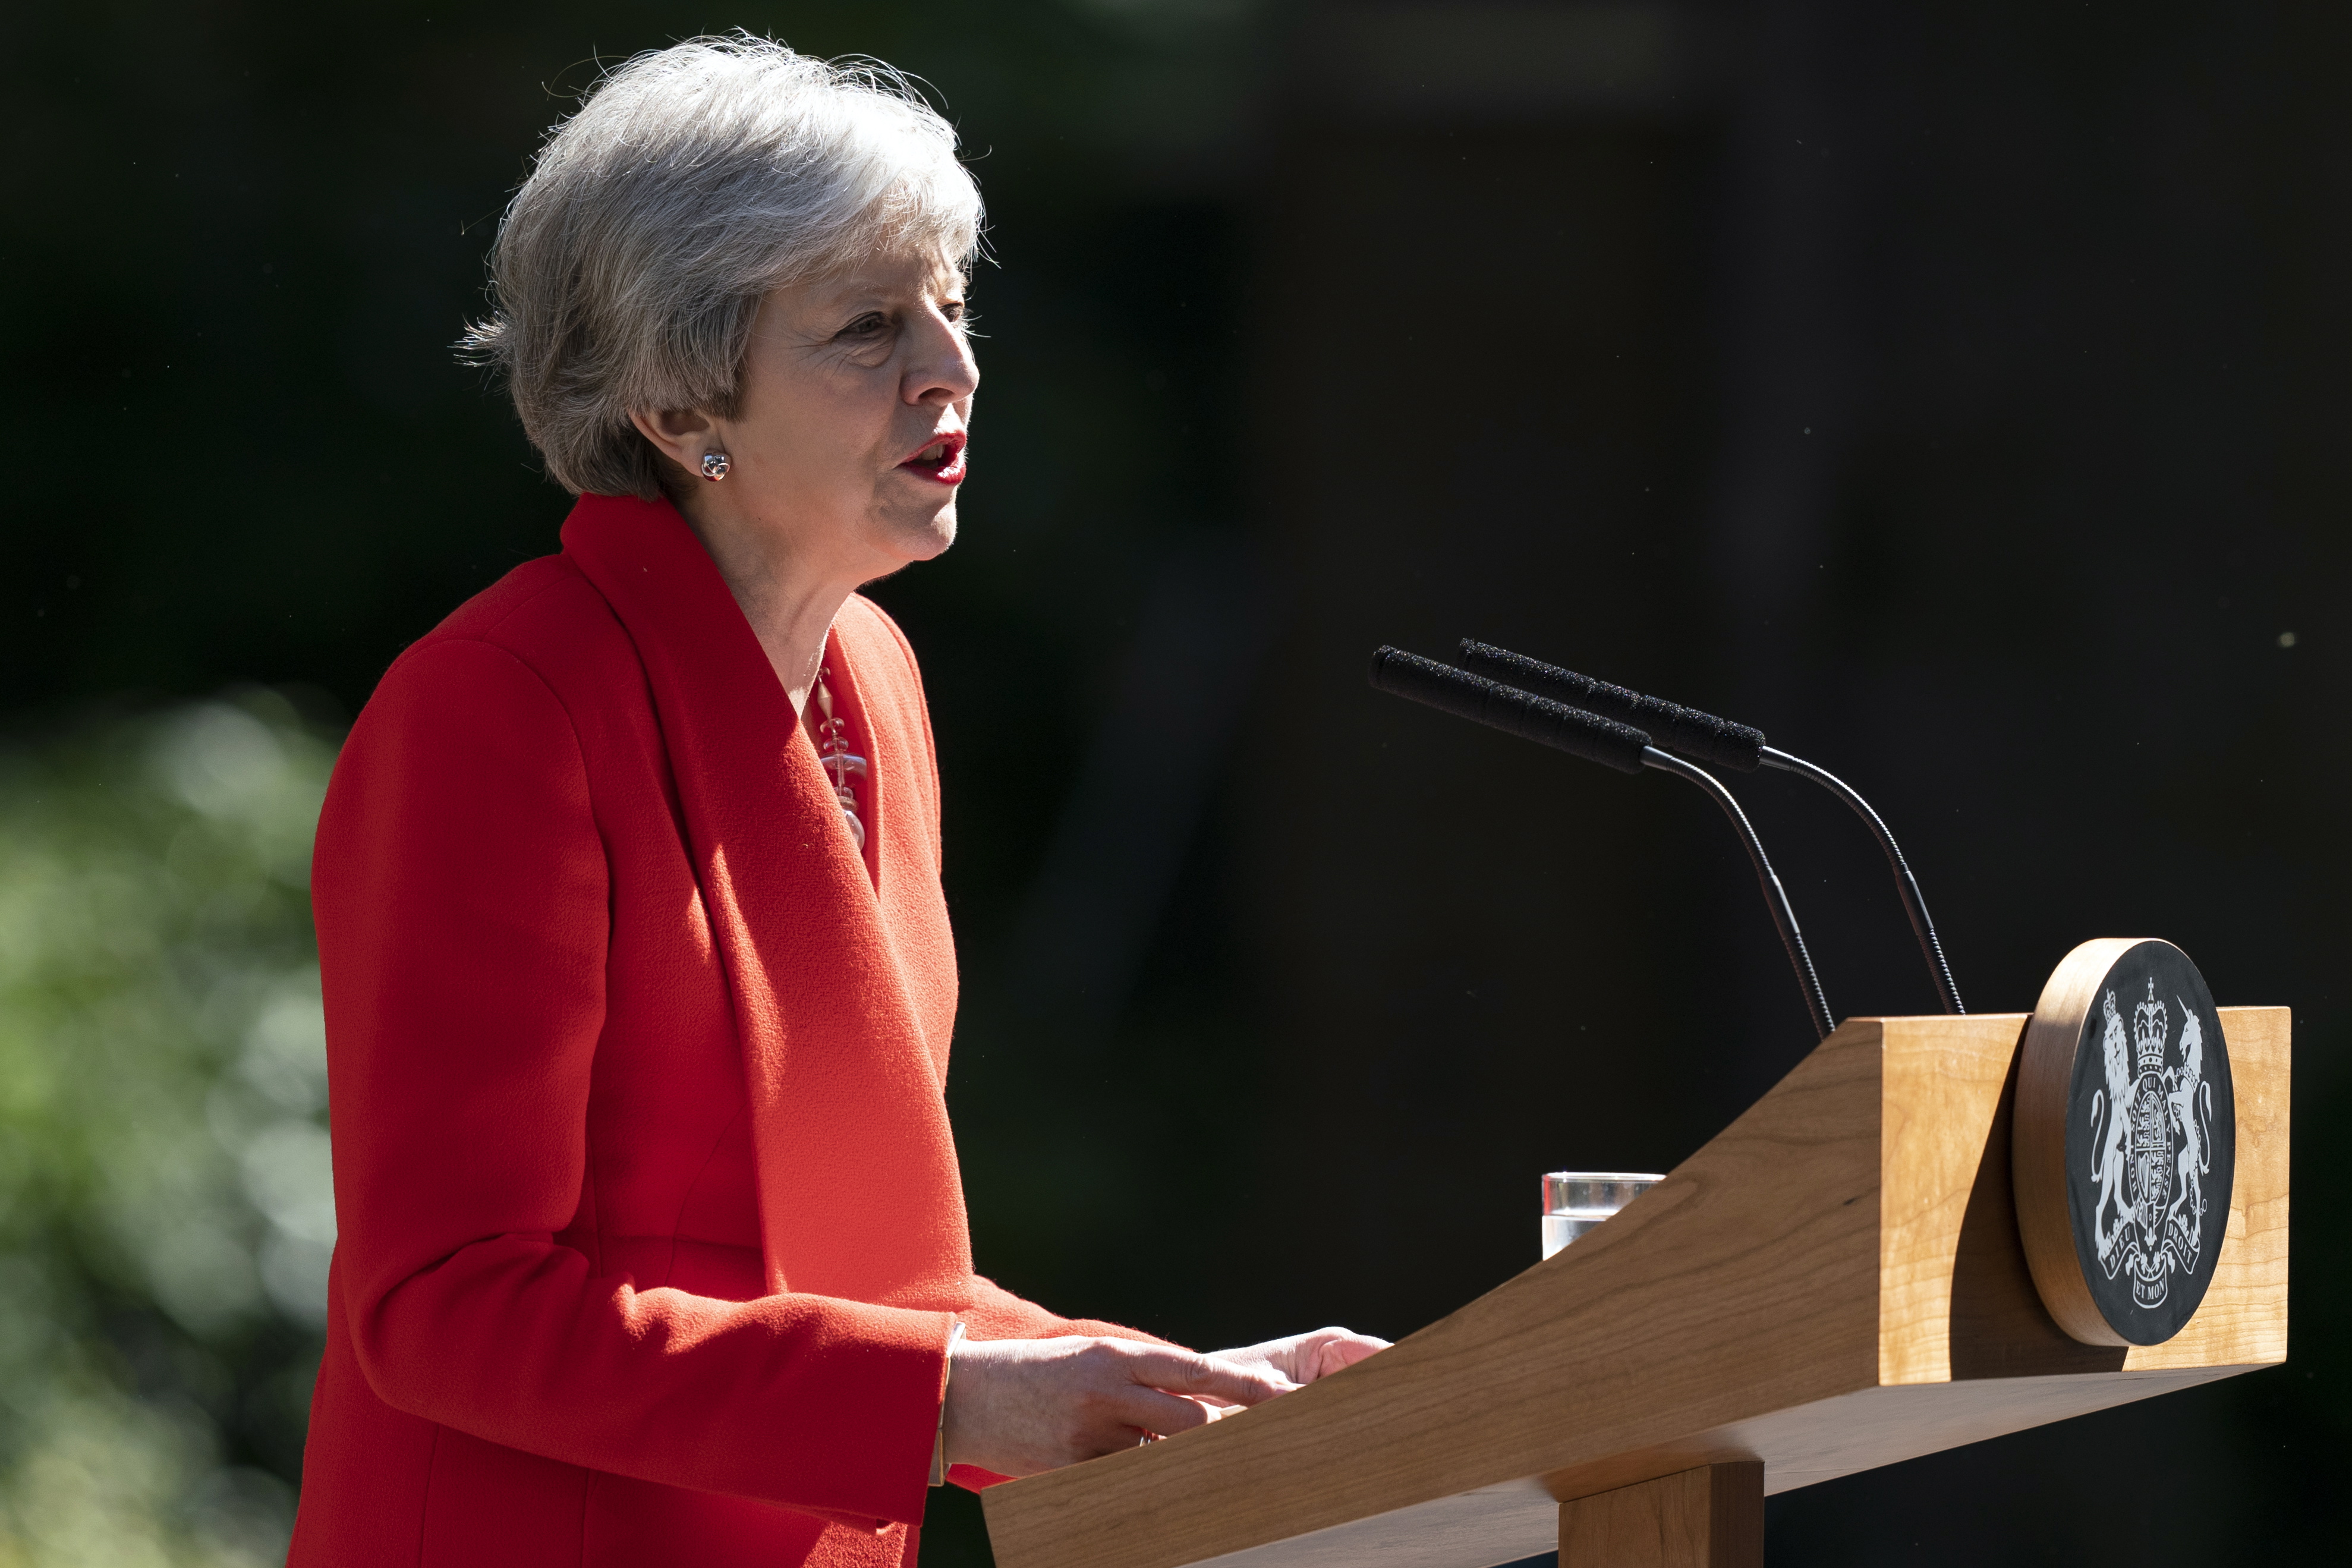 epa07596640 British Prime Minister Theresa May addresses the media to announce her resignation, outside 10 Downing Street, Central London, Britain, 24 May 2019. Mrs May announced she will resign as Prime Minister on 07 June 2019 in the meantime triggering a leadership contest to succeed her as the leader of the governing Conservative Party.  EPA/WILL OLIVER